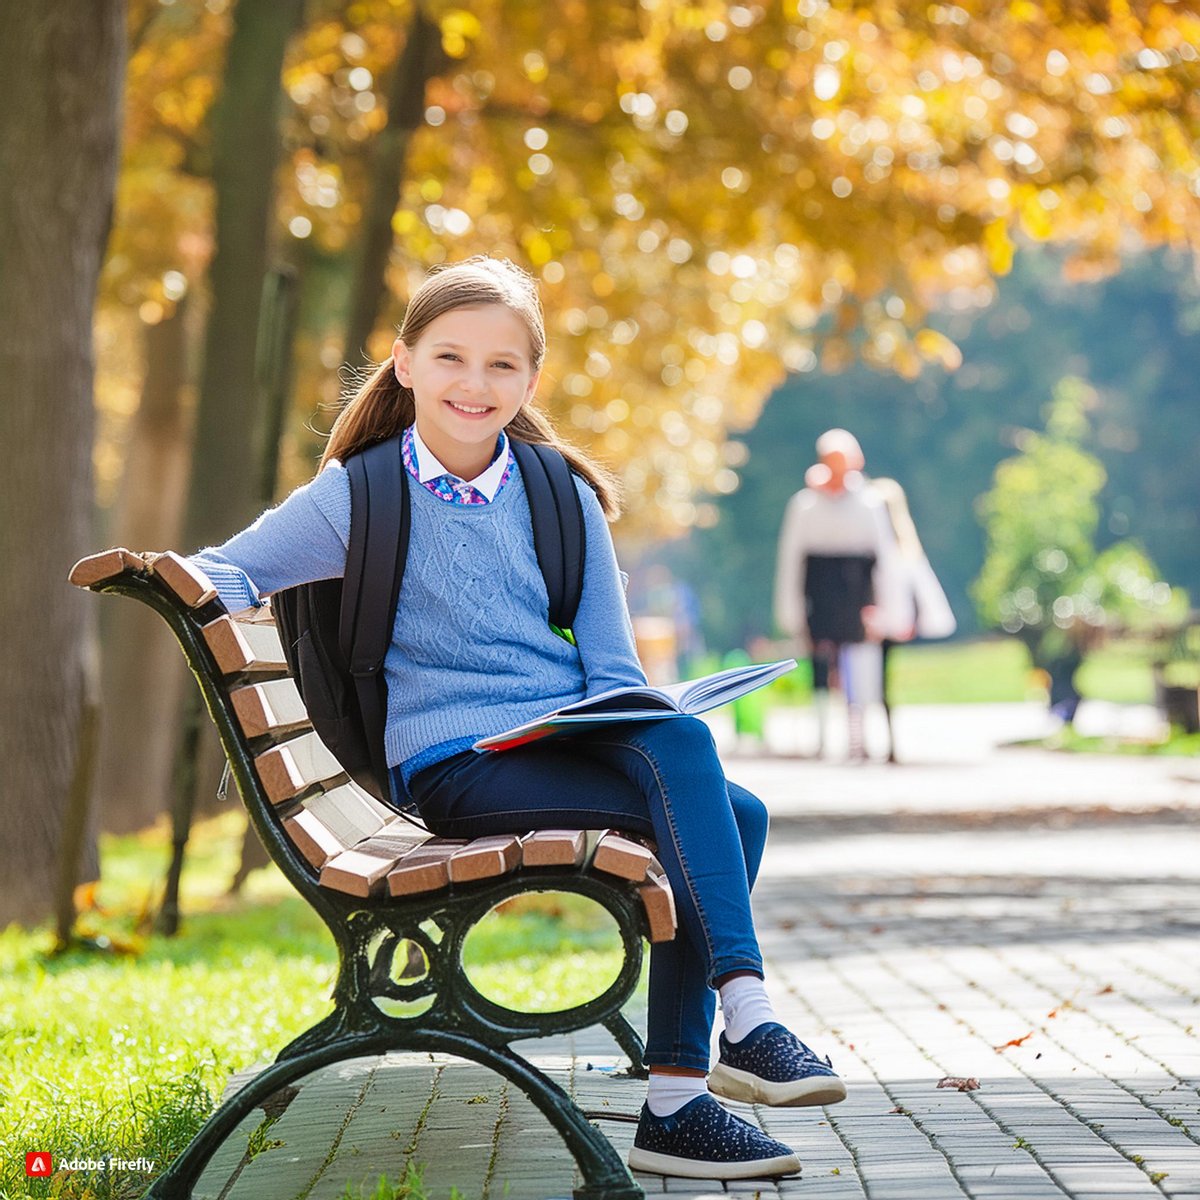 Firefly 12 years old girl sitting in the park on a bench 62571.j